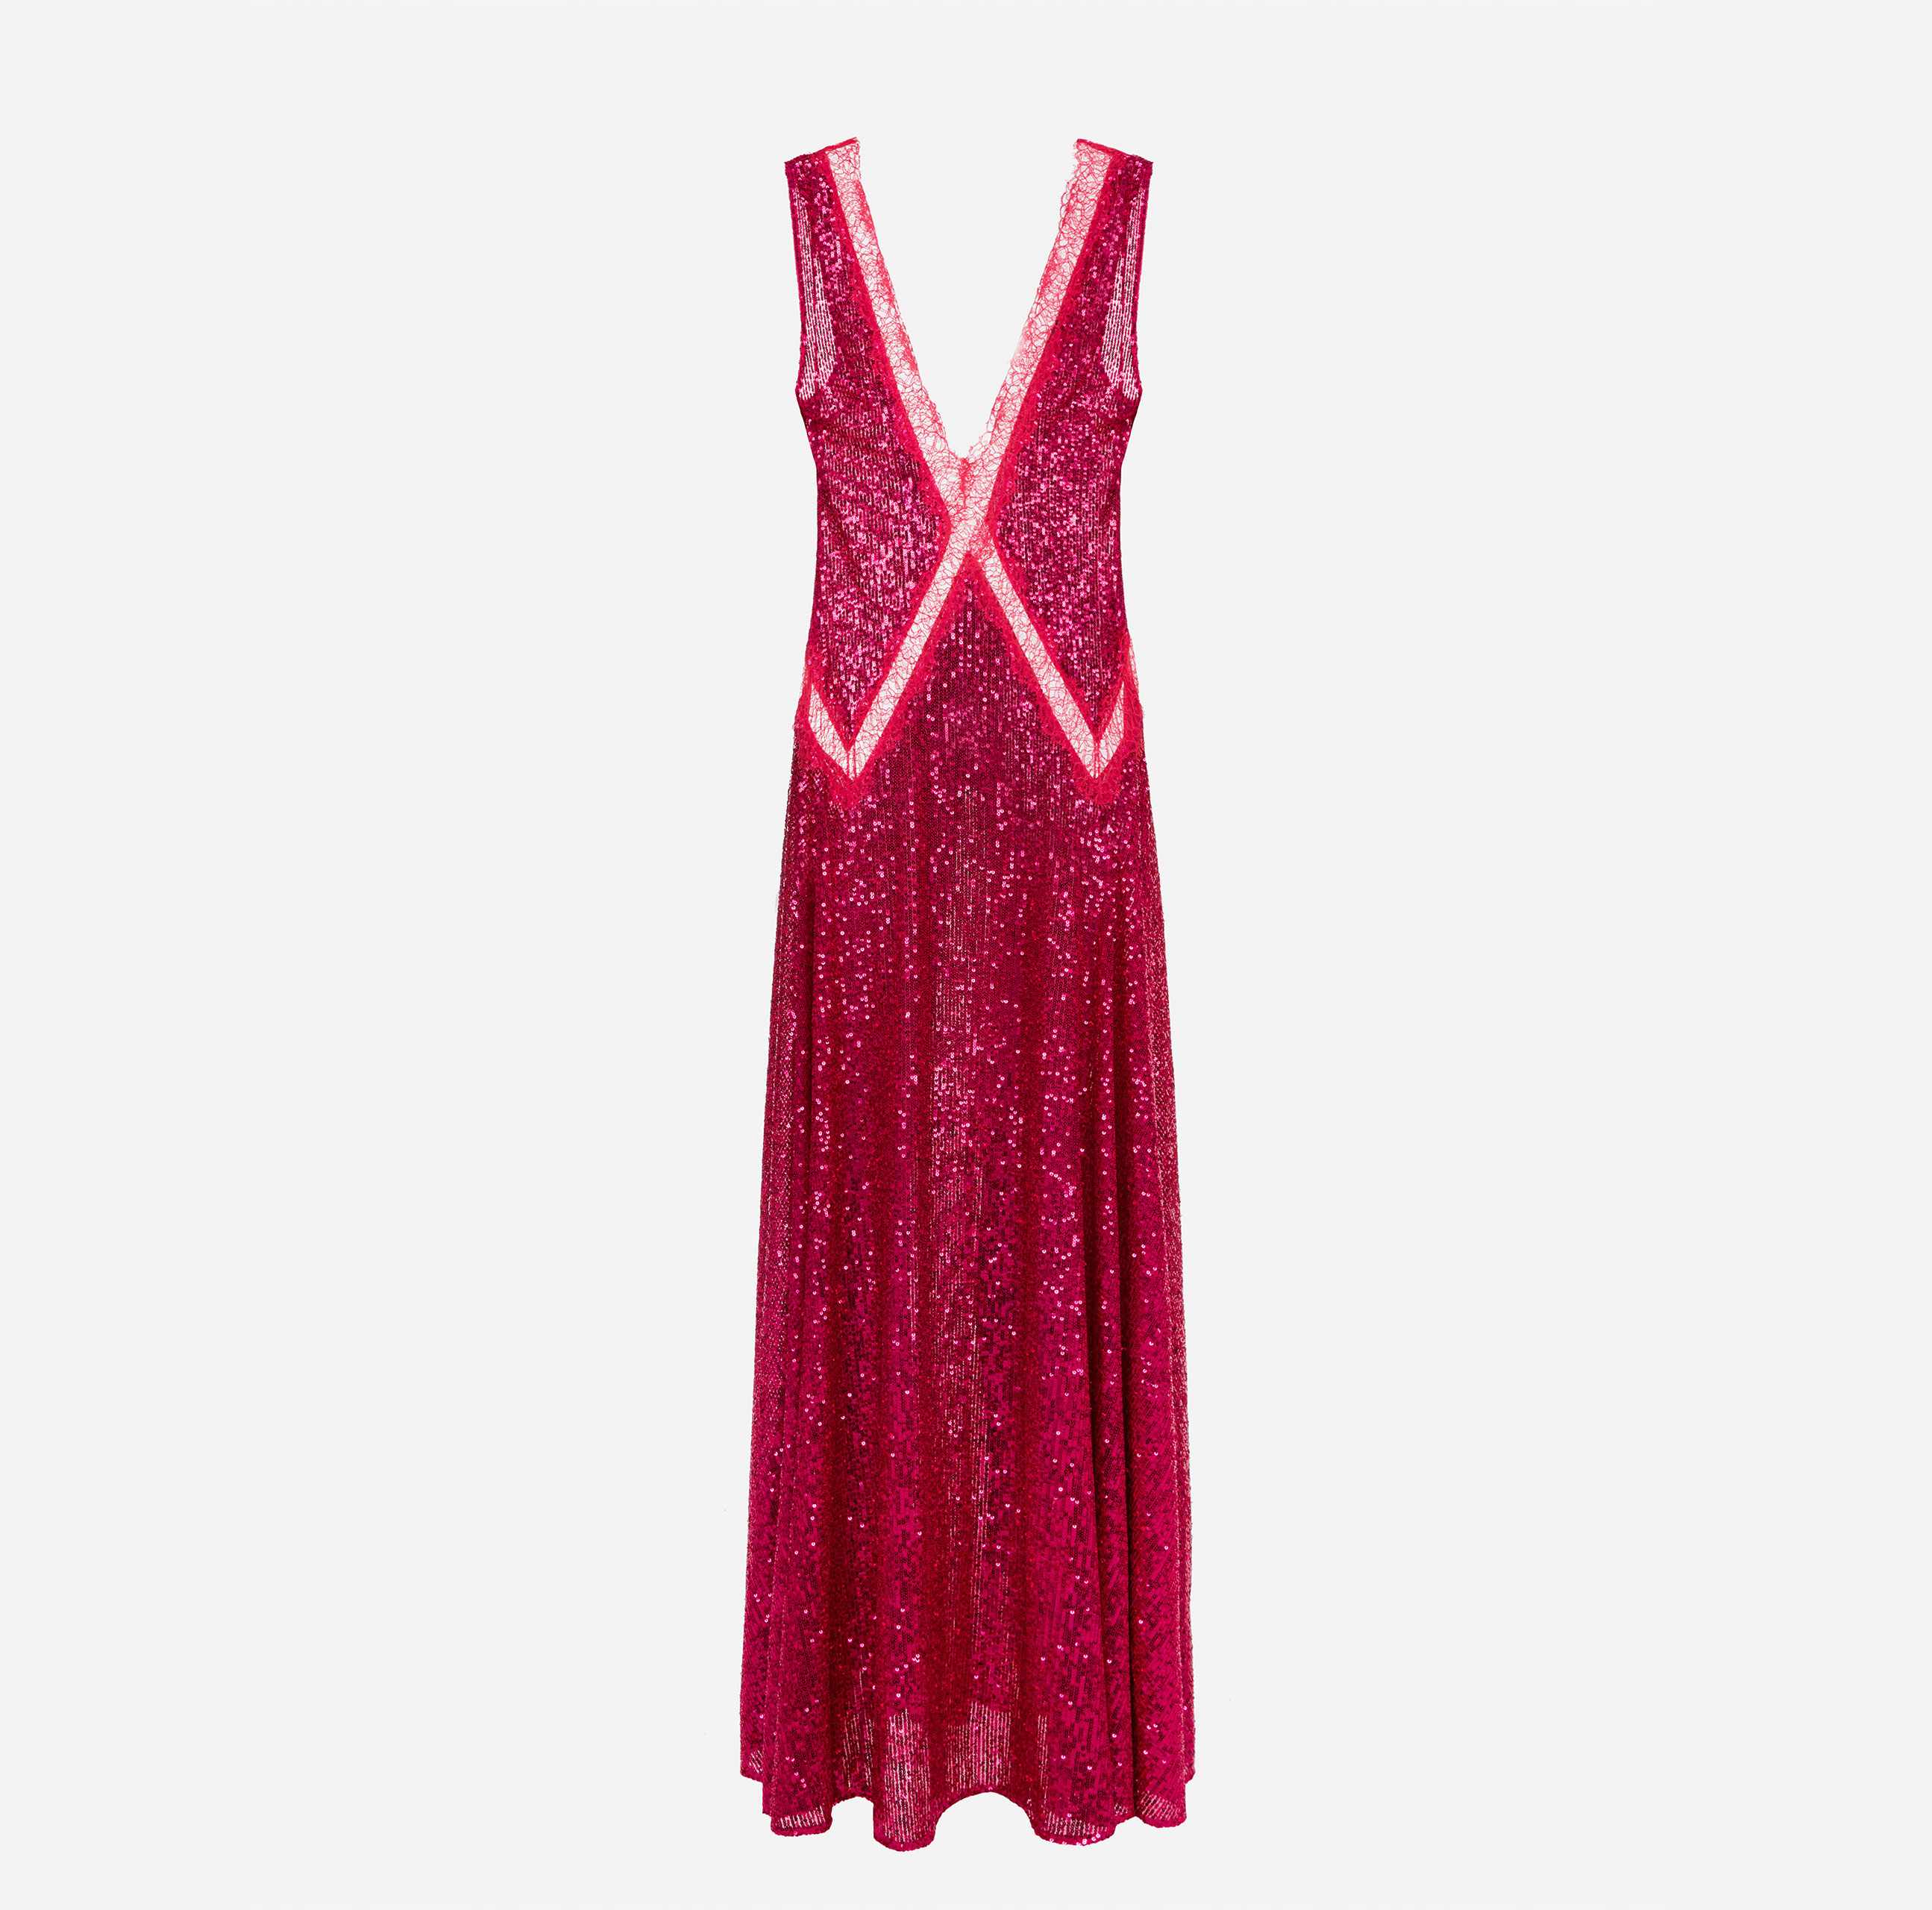 Red carpet dress with inserts in lace and sequin fabric - Elisabetta Franchi